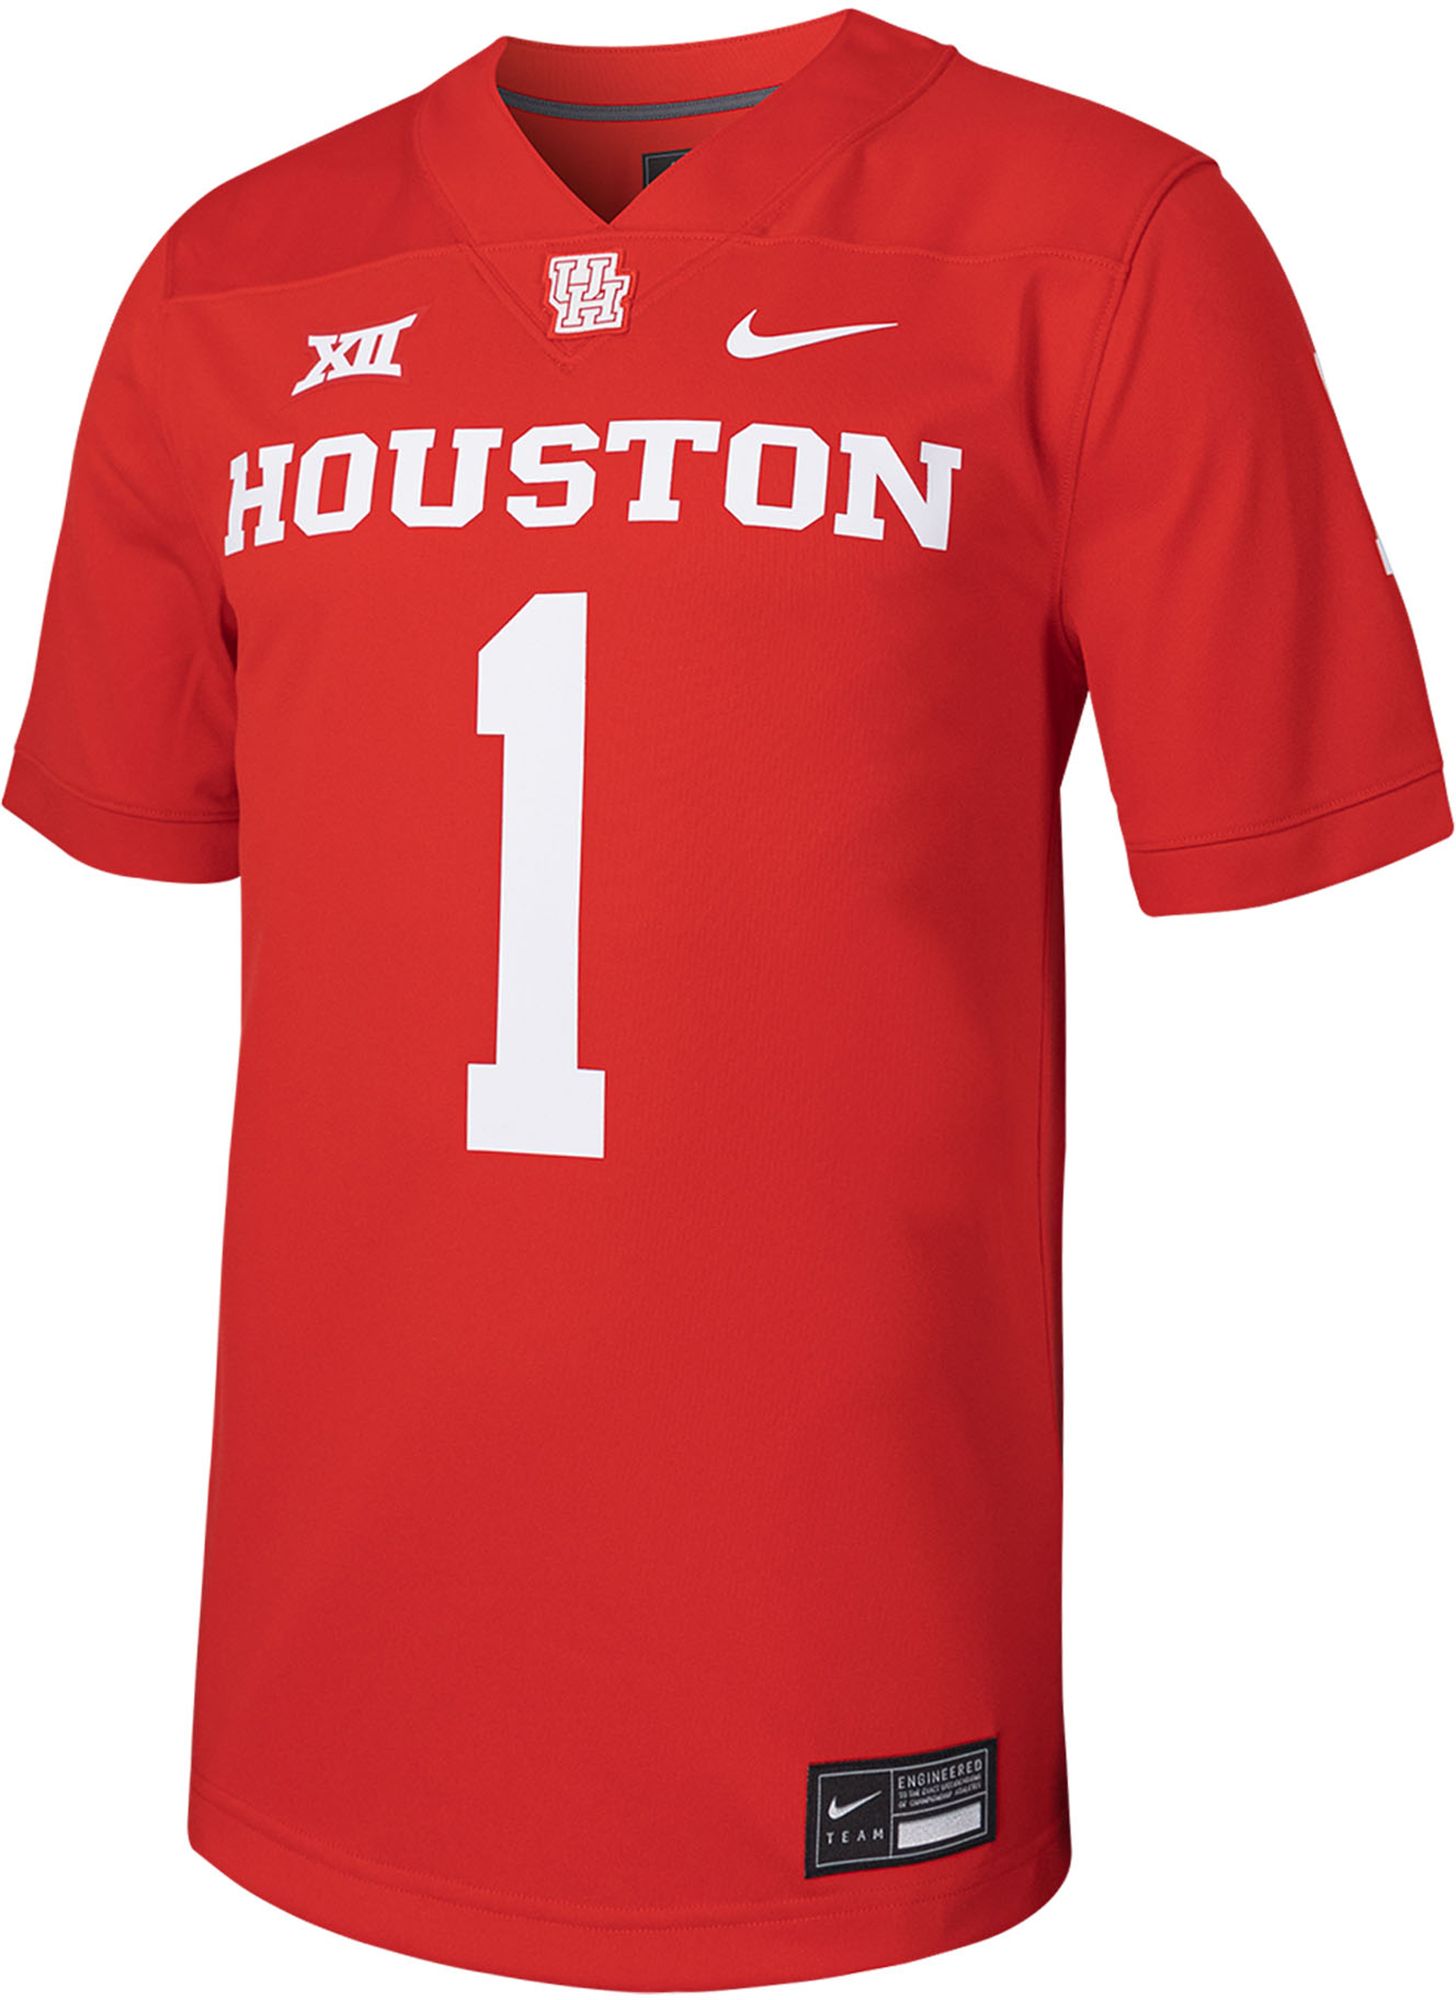 Cougars football home jersey